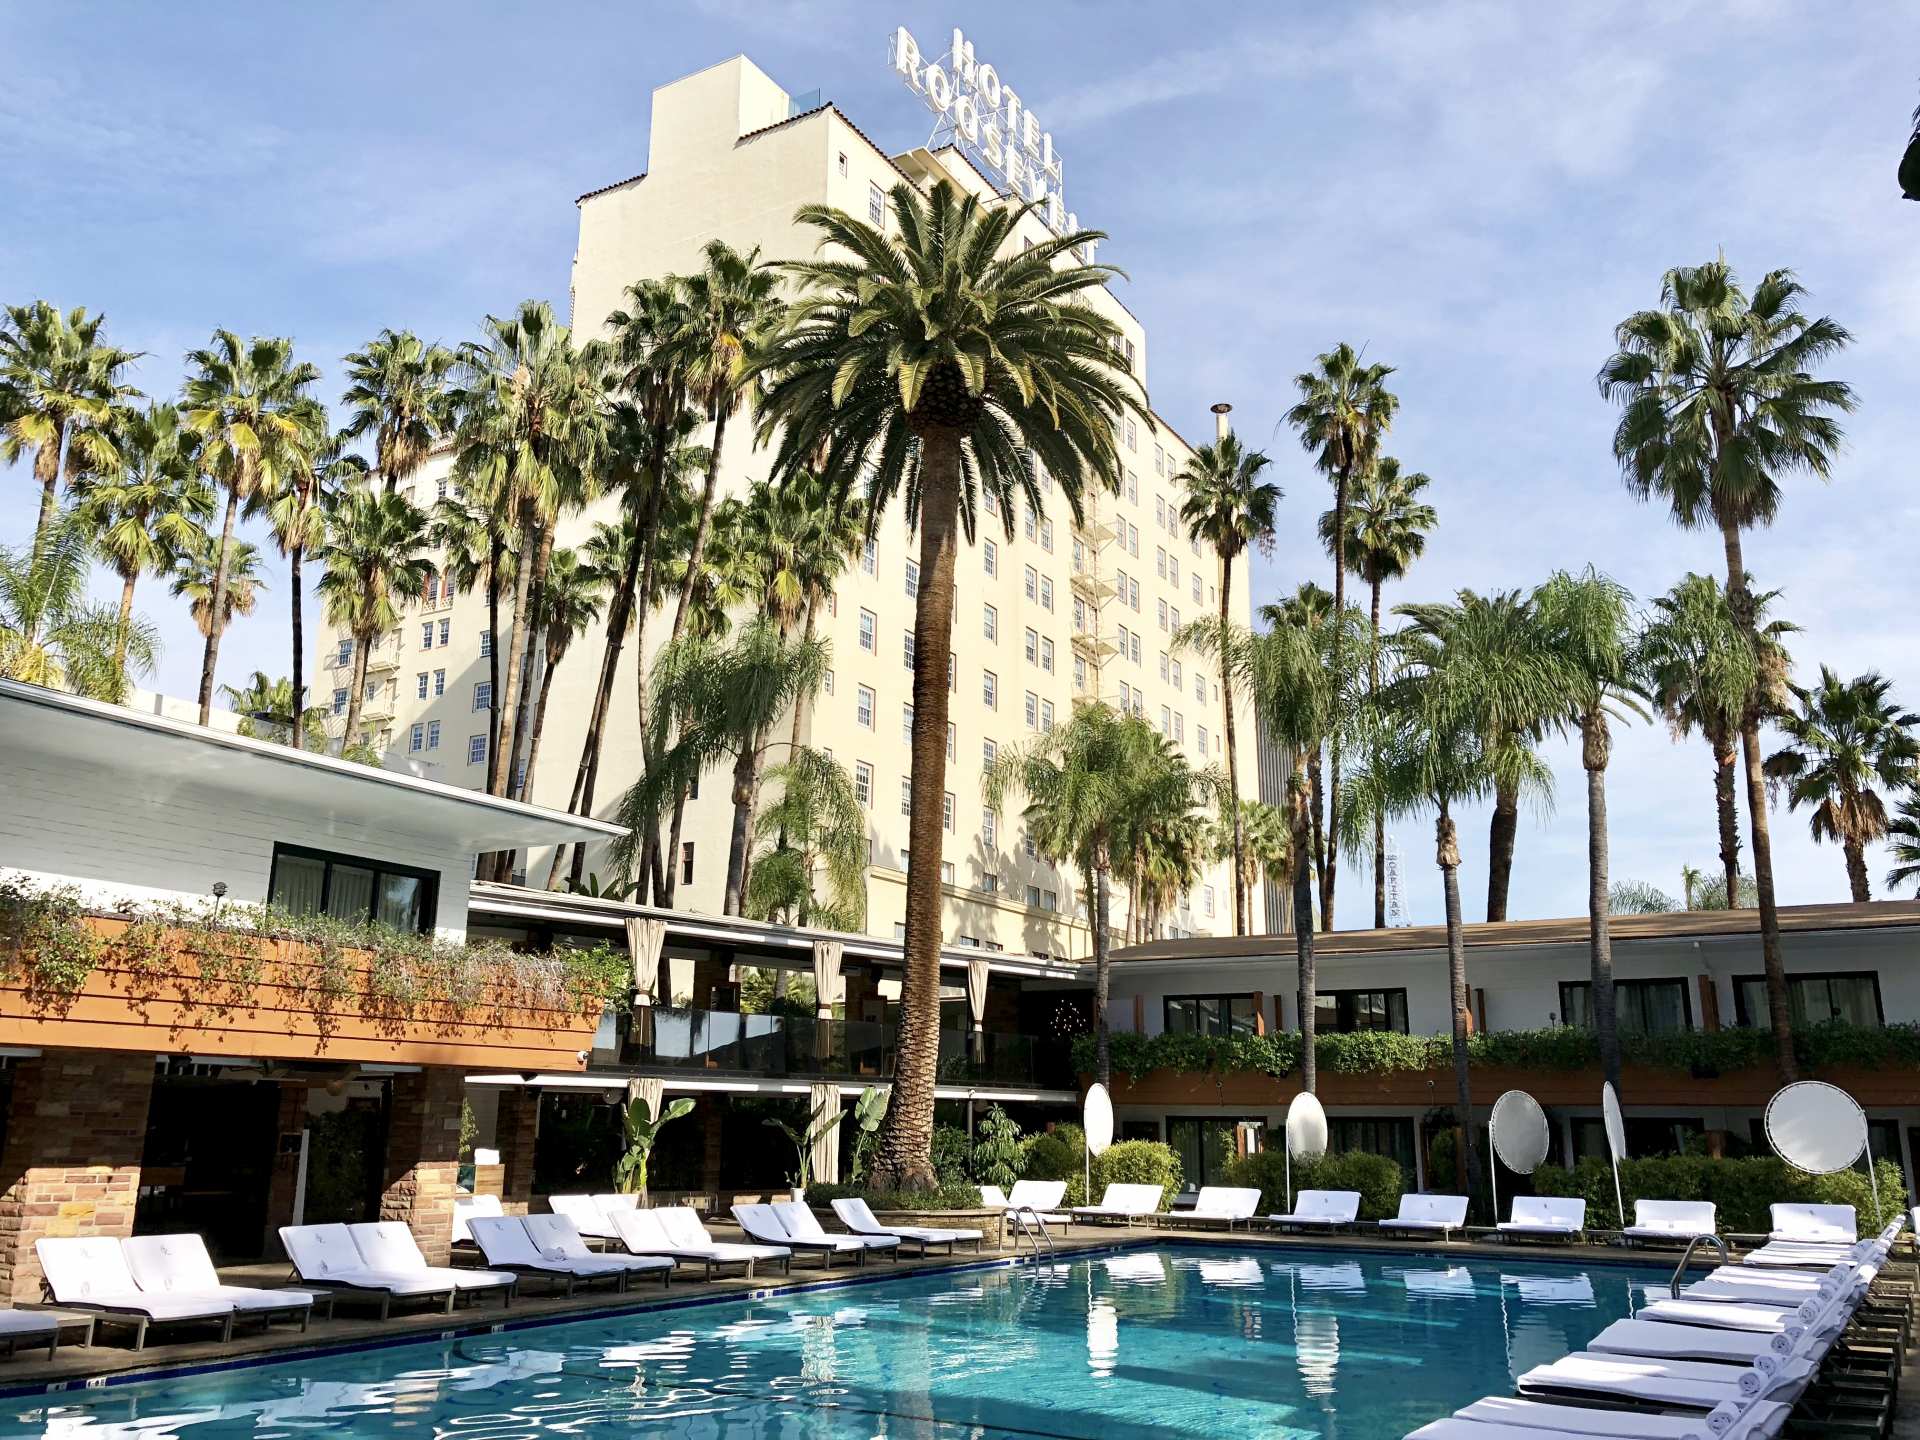 The pool at the Hollywood Roosevelt in Los Angeles